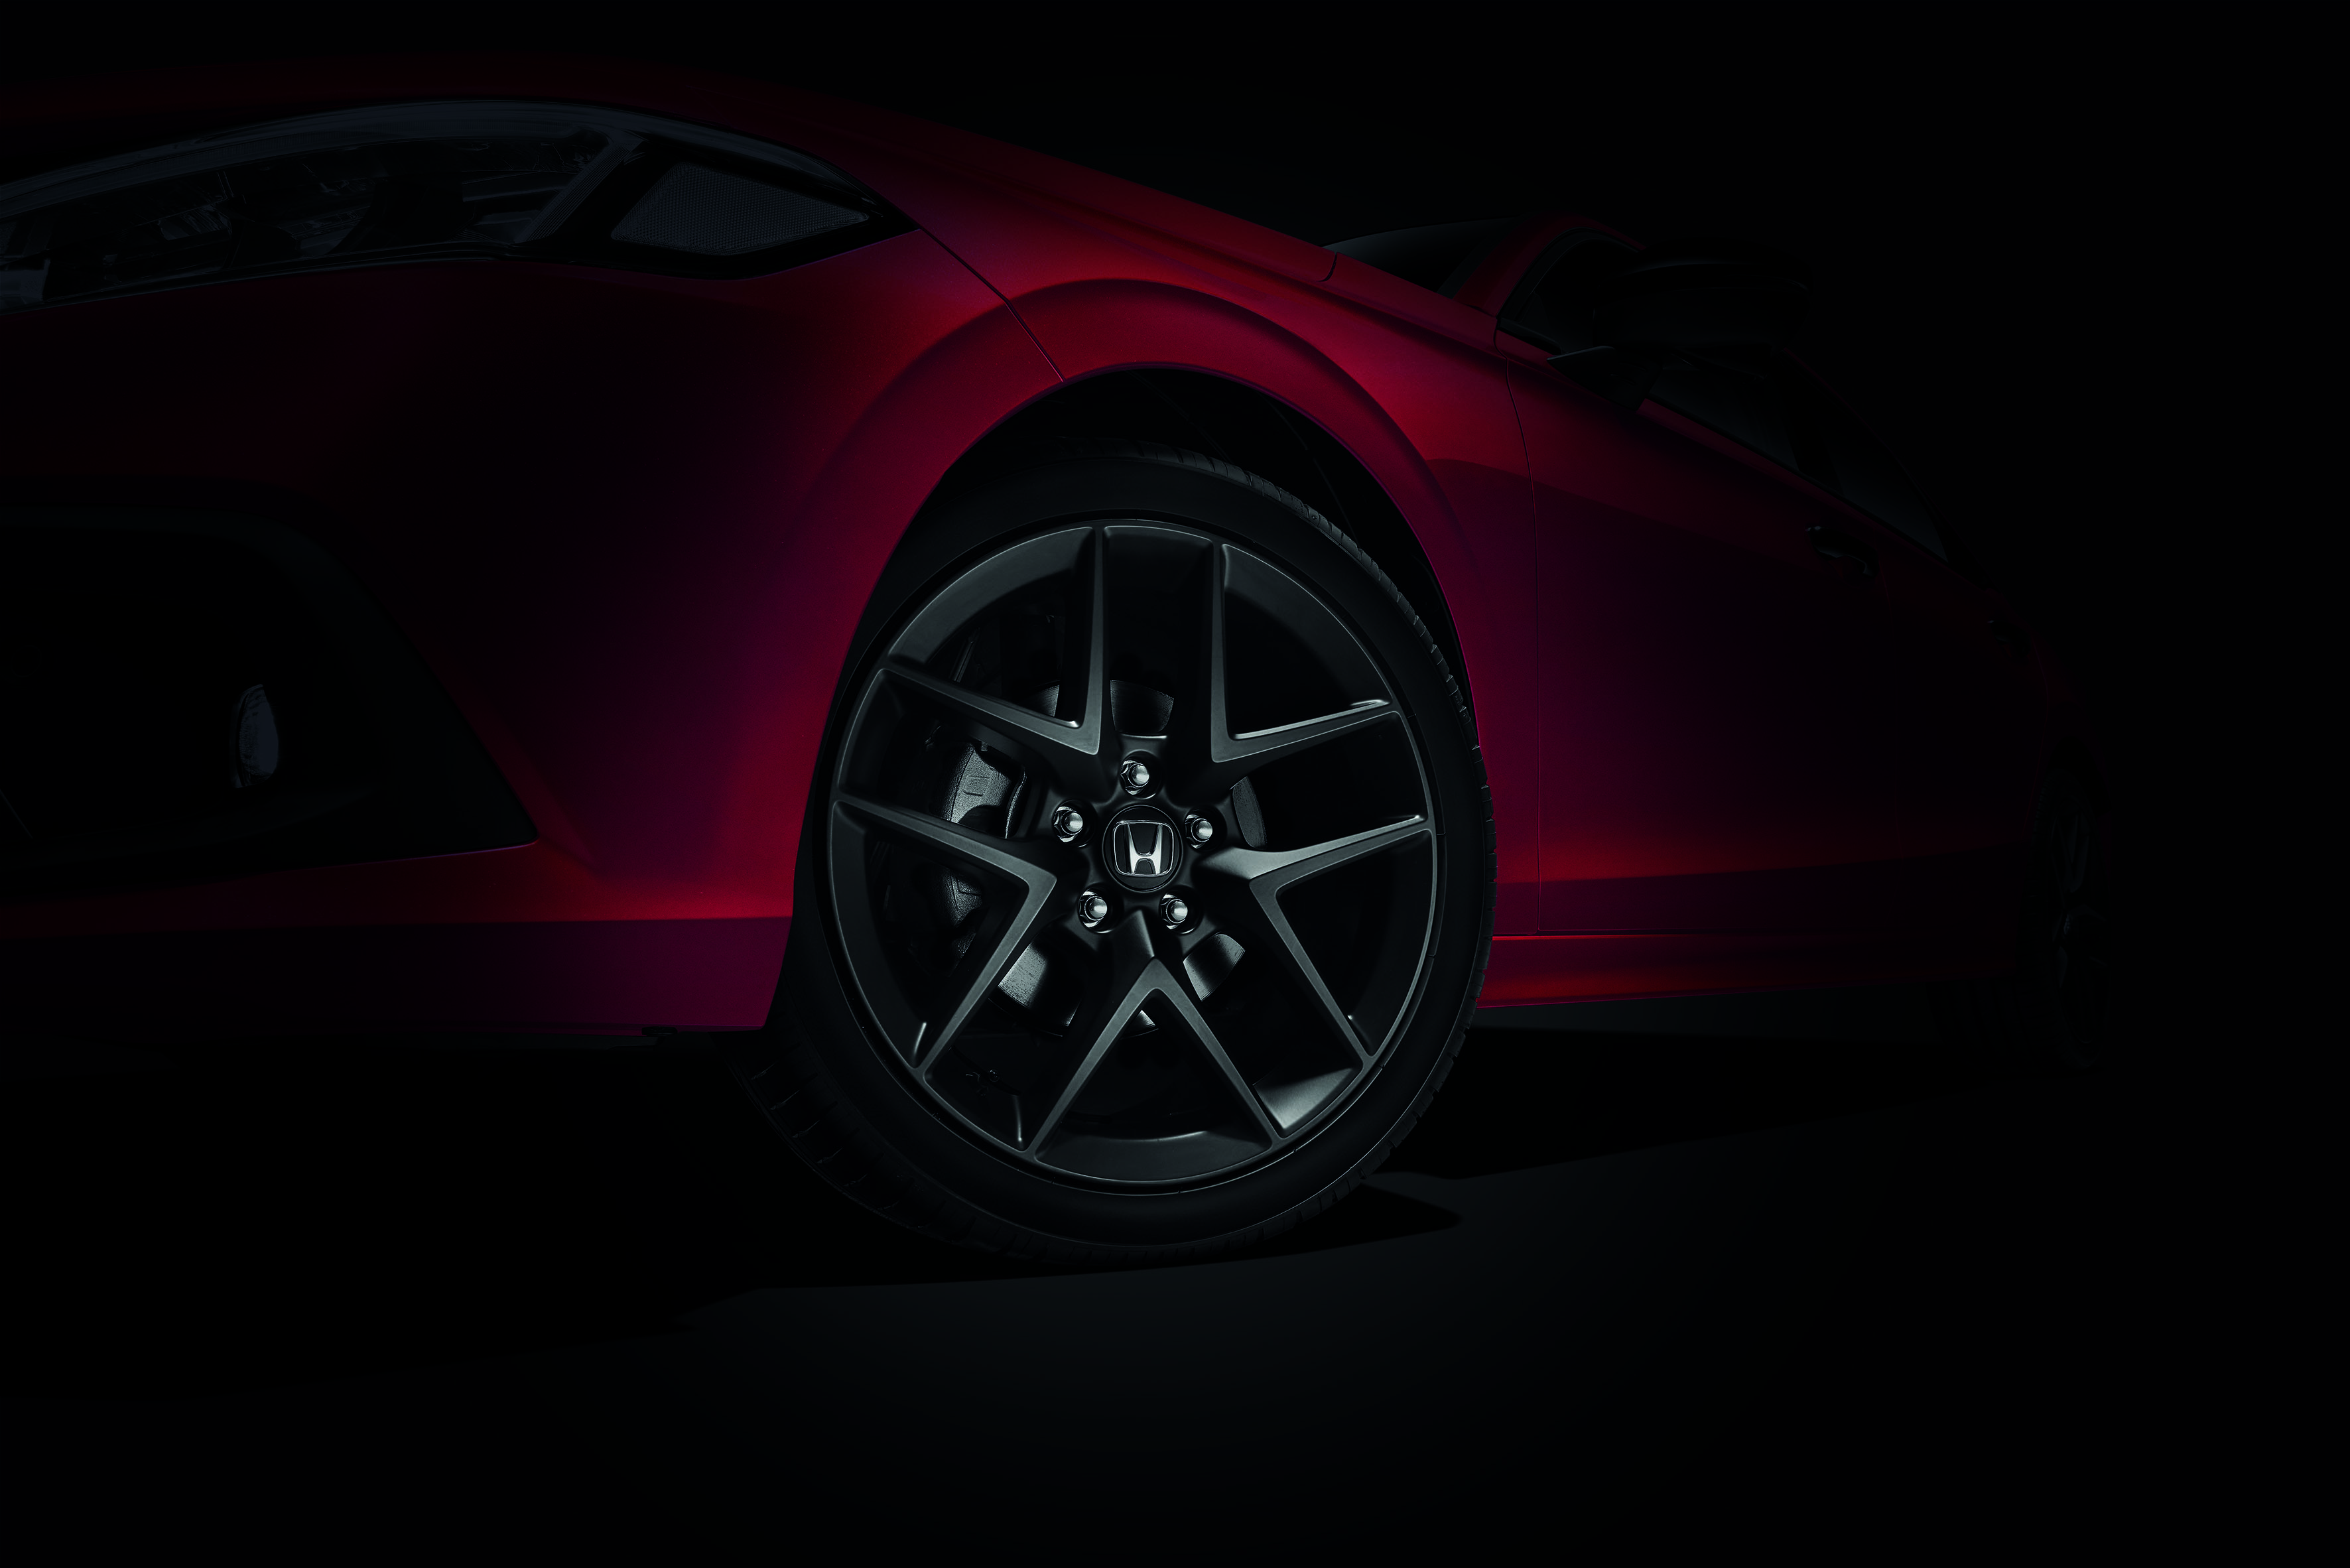 The All-New Civic features 18” Black Matte Alloy Wheels.